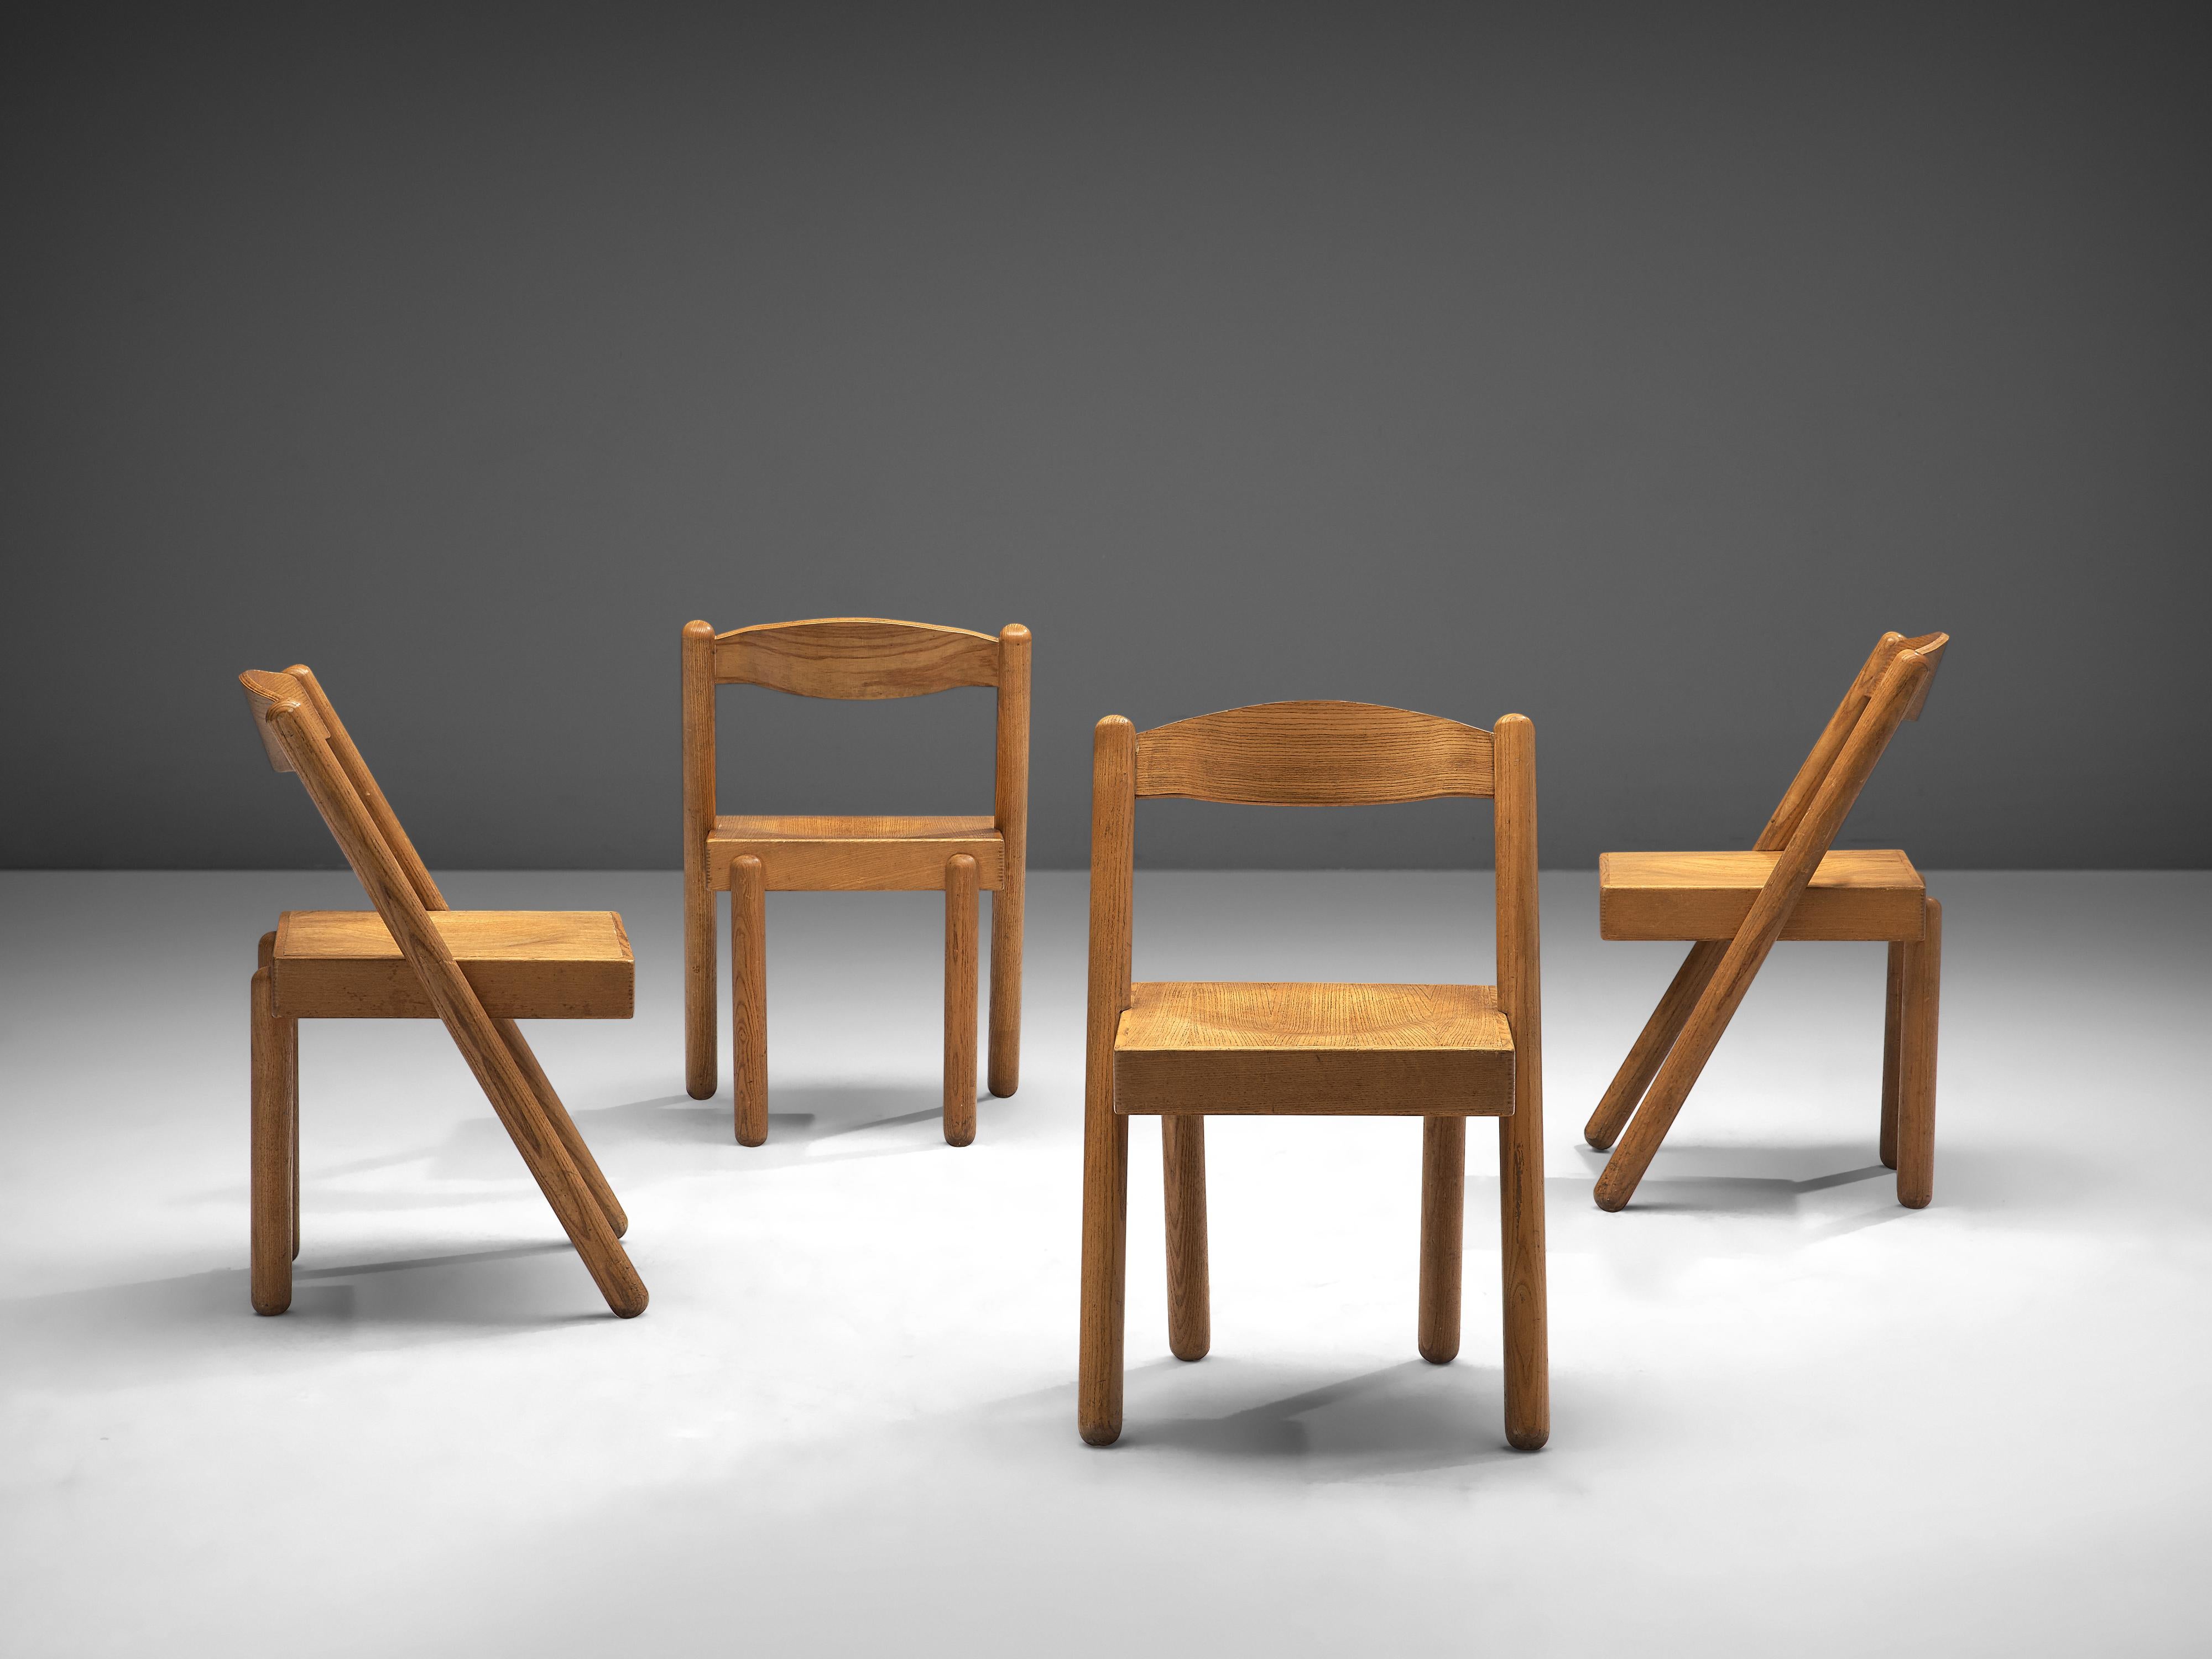 Roberto Pamio and Renato Toso, set of four dining chairs model ‘Iva’, patinated ash, Italy, 1960s

This Italian set of 4 dining chairs was designed by Roberto Pamio and Renato Toso in the 1960s. The chair model ‘Iva’ is characterized by its